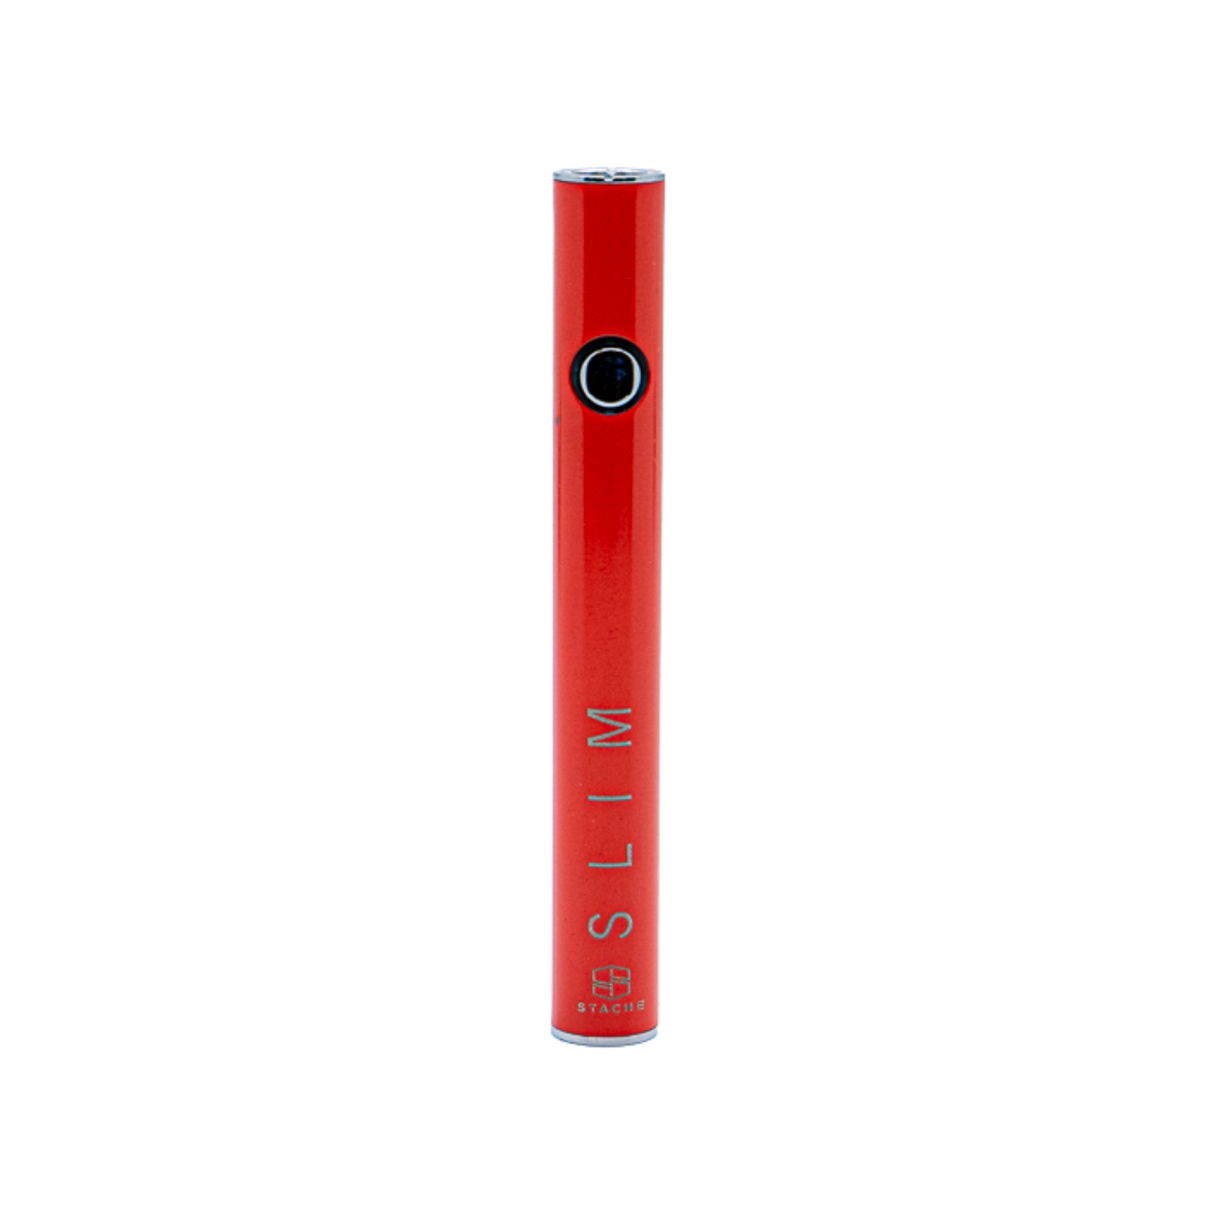 Stacheproductswholesale SLIM Battery in Red - Front View, Compact and Portable